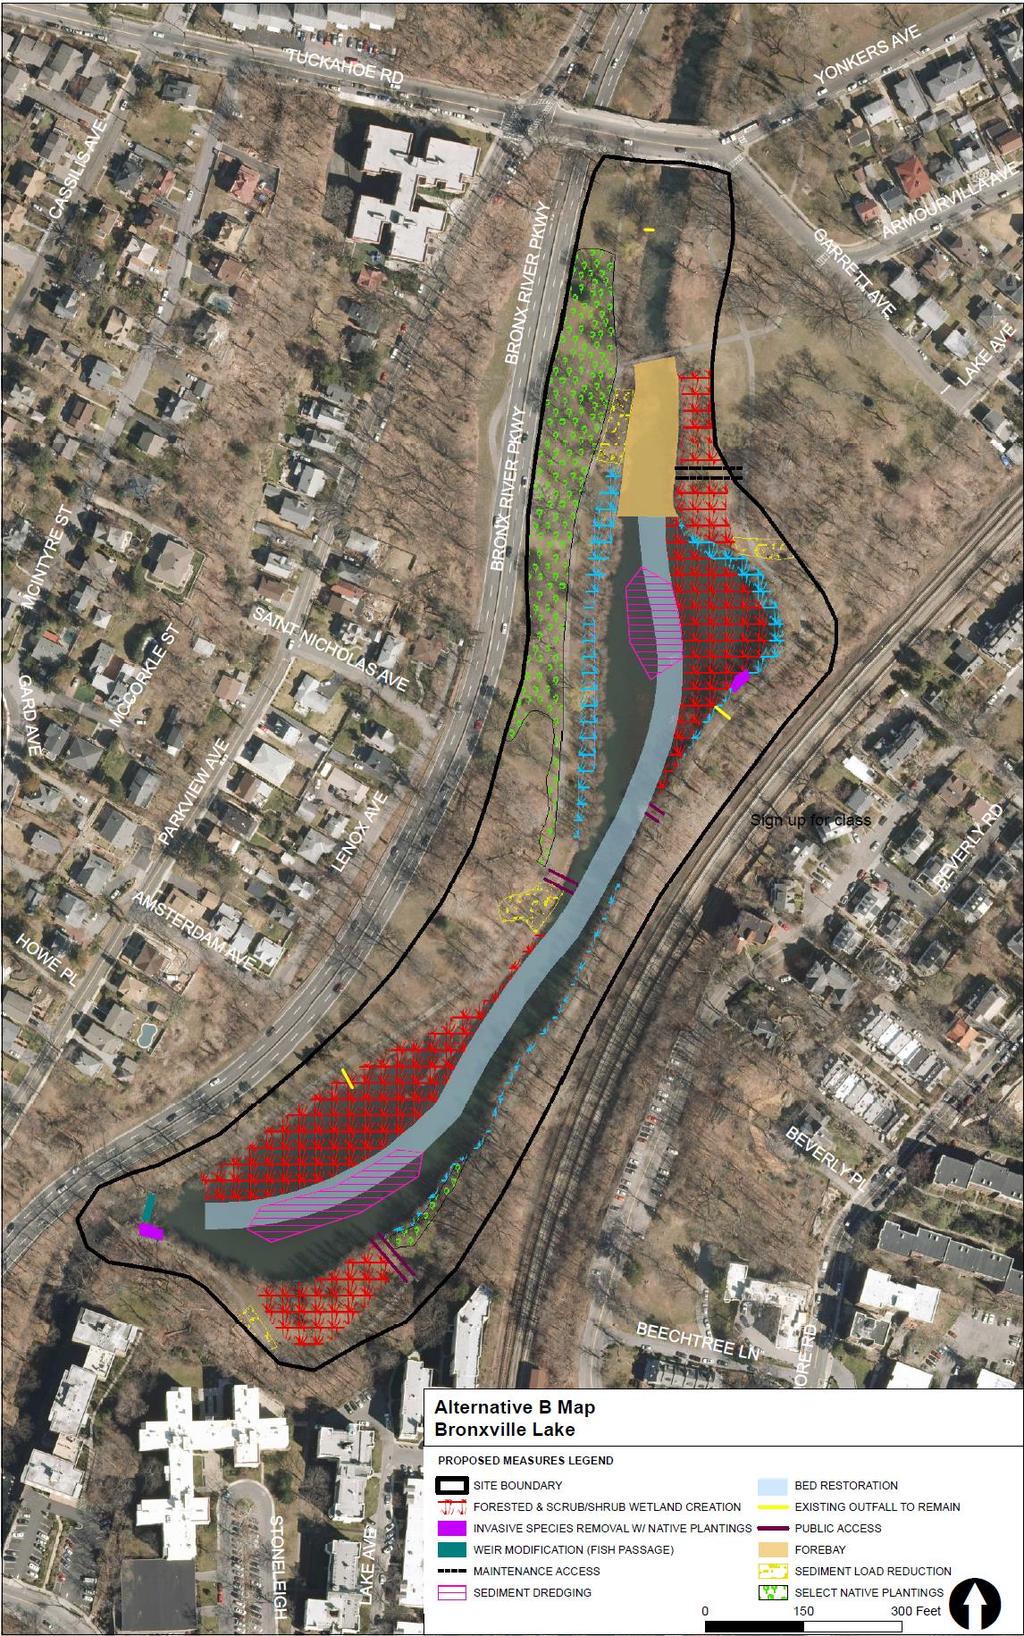 PROJECT FIRST COST (2016): $7,840,000 Bronxville Lake Tentatively Selected Plan Design: Channel bed restoration with excavation and bedding stone installation (~1.28 ac).